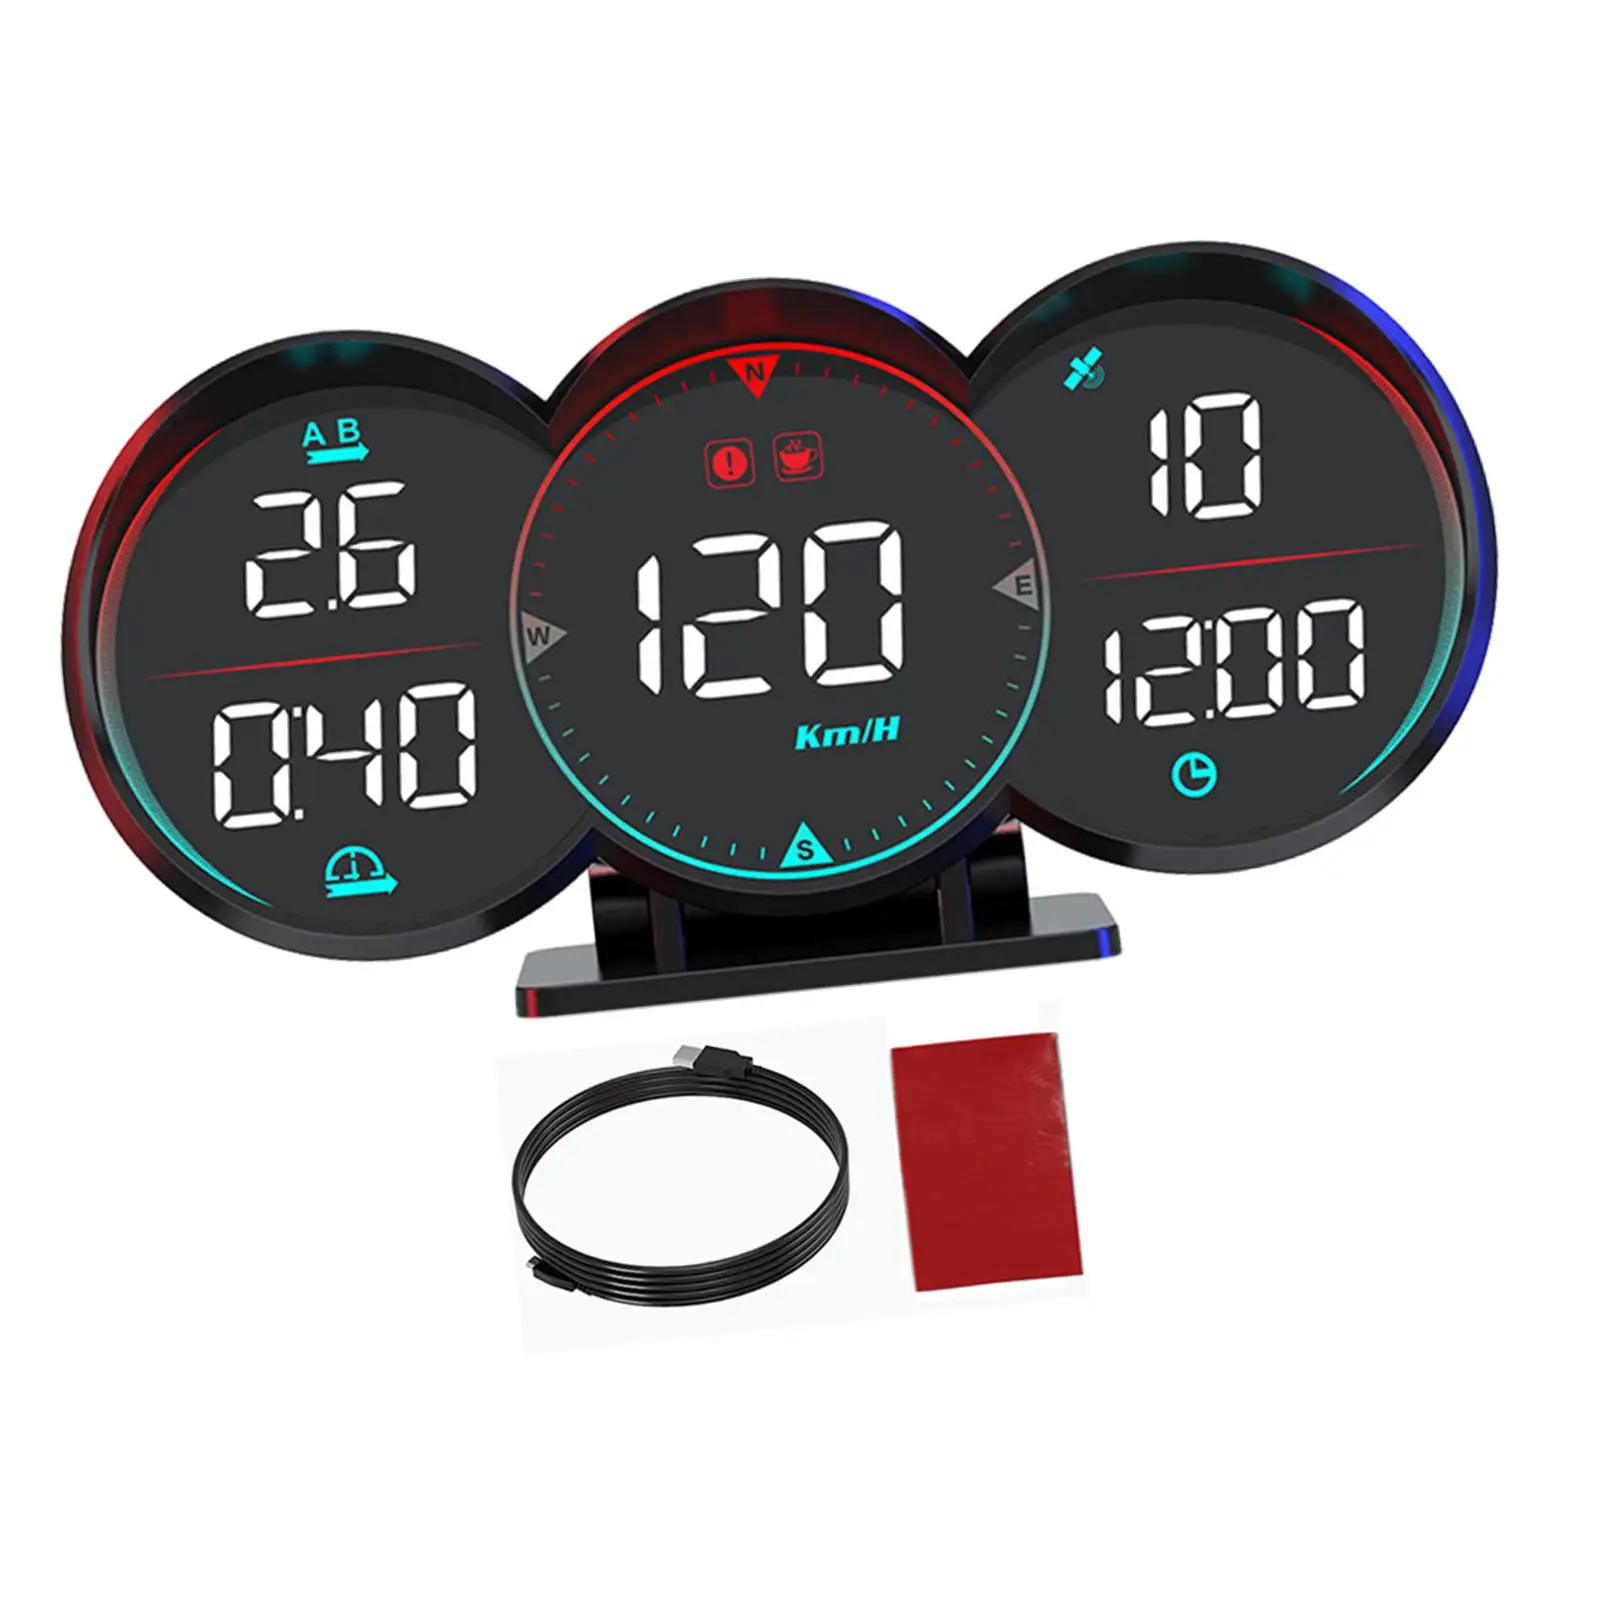 G17 GPS HUD LED Display 360 Degree Rotation Digital GPS Speedometer for Car for Driving Outdoor Auto Replacement Travel premium